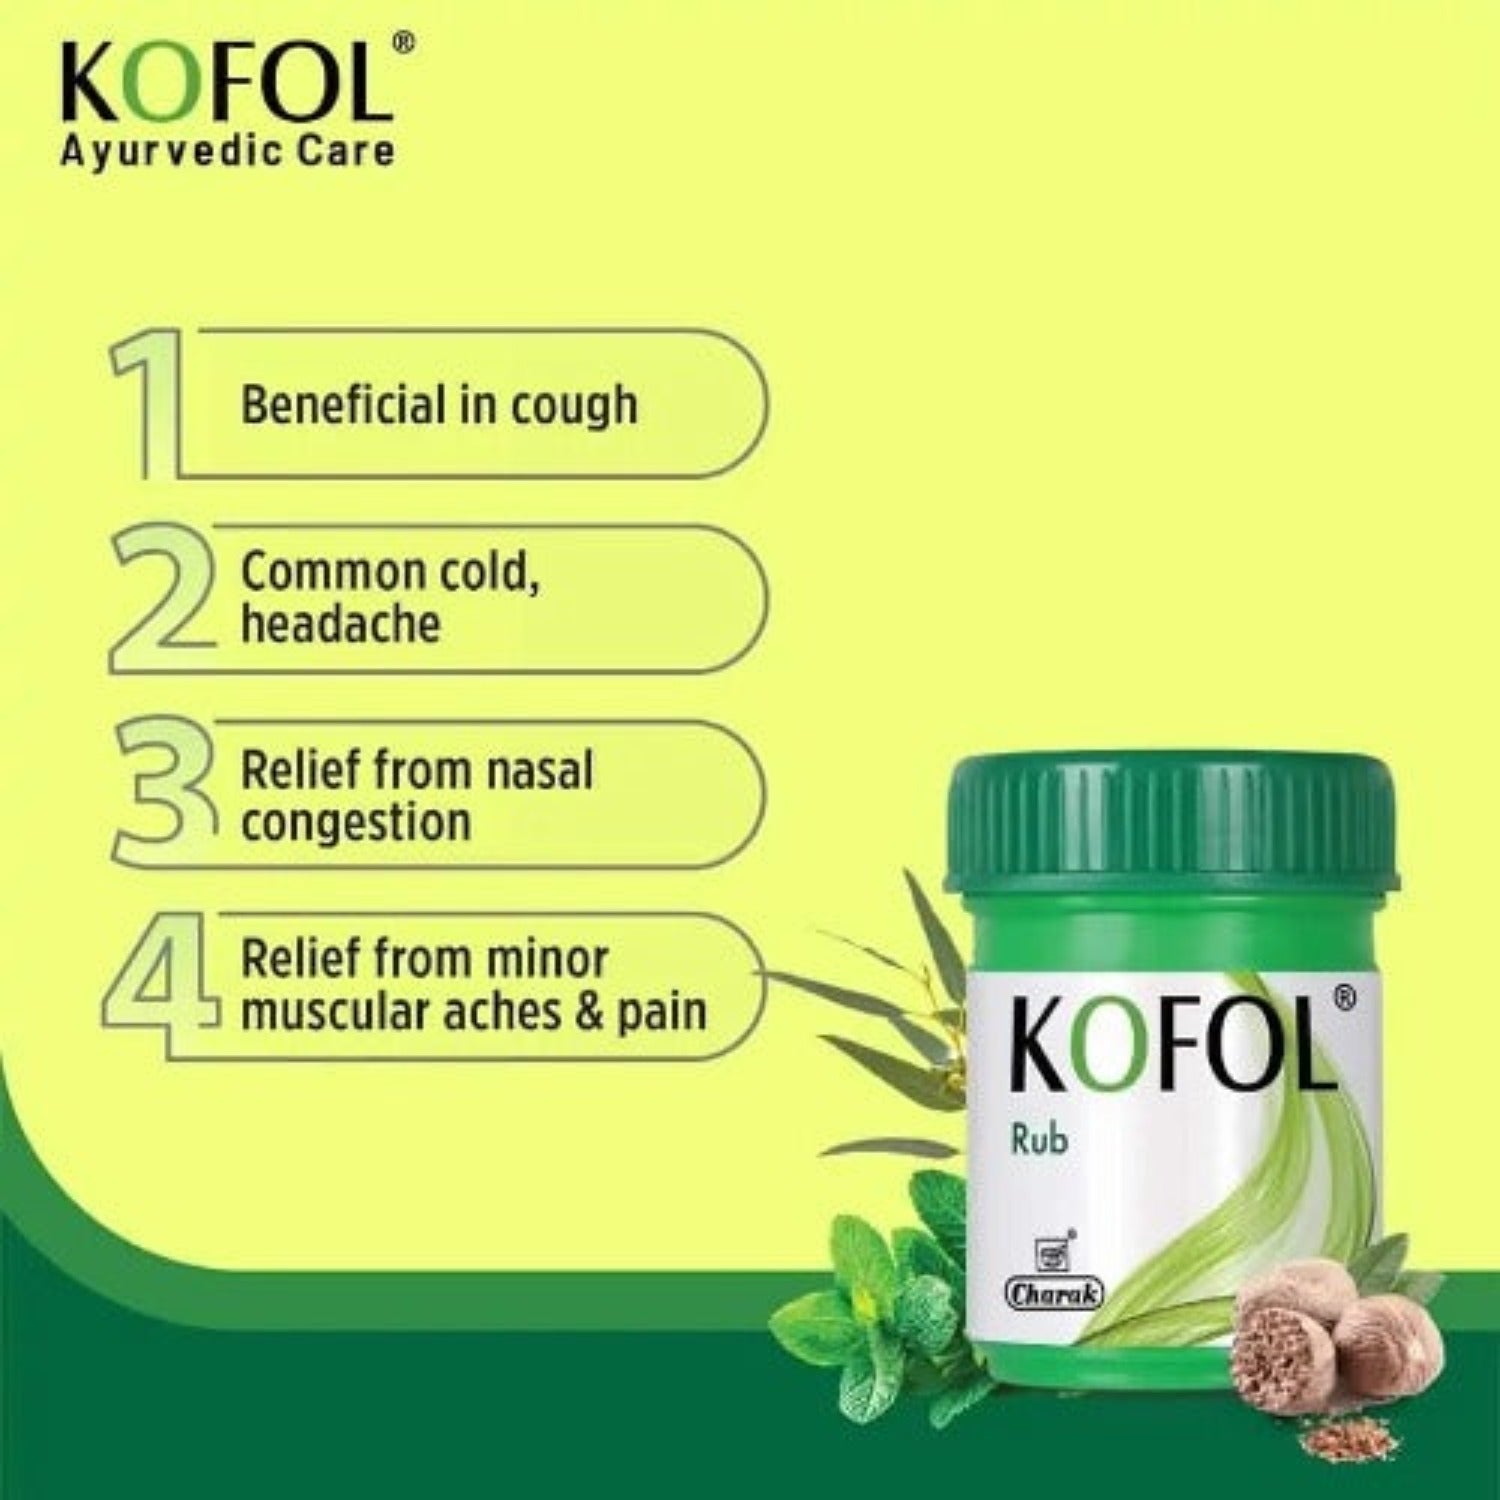 Charak Ayurvedic Kofol Rub For Cough & Common Cold Relife From Cold,Cough,Blocked Nose,Headache,Body Ache,Muscular Stiffness And Breathing Difficulty Balm 2 x 25 ml